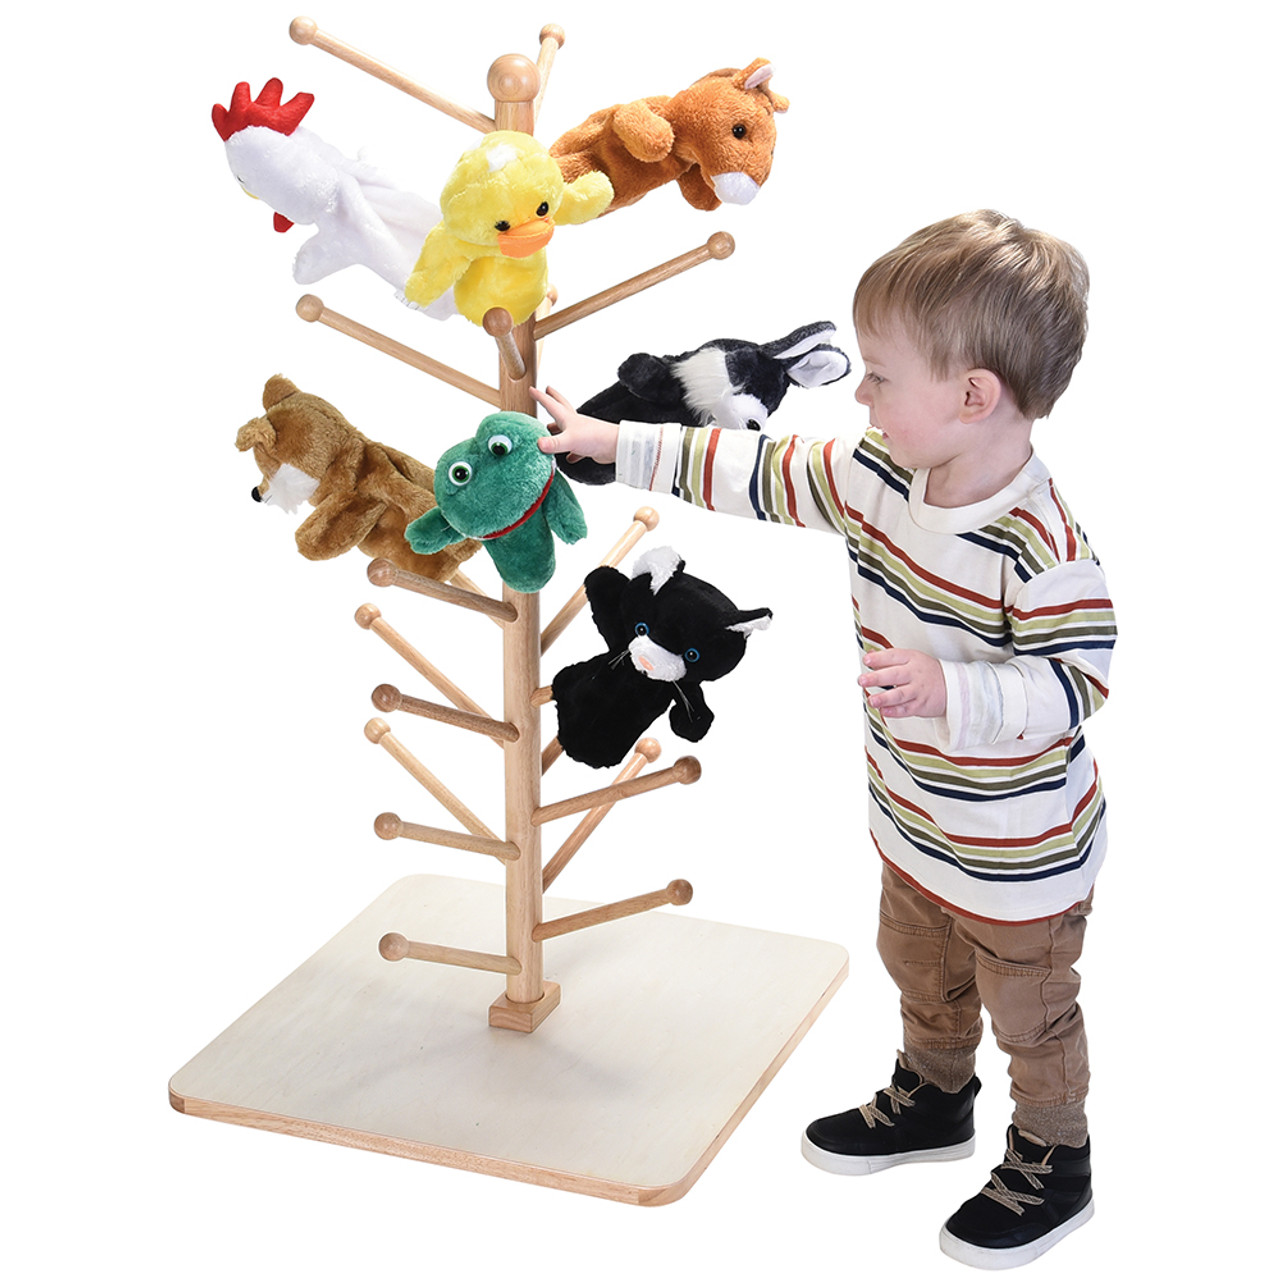 Wooden Puppet Tree - Cre8tive Minds